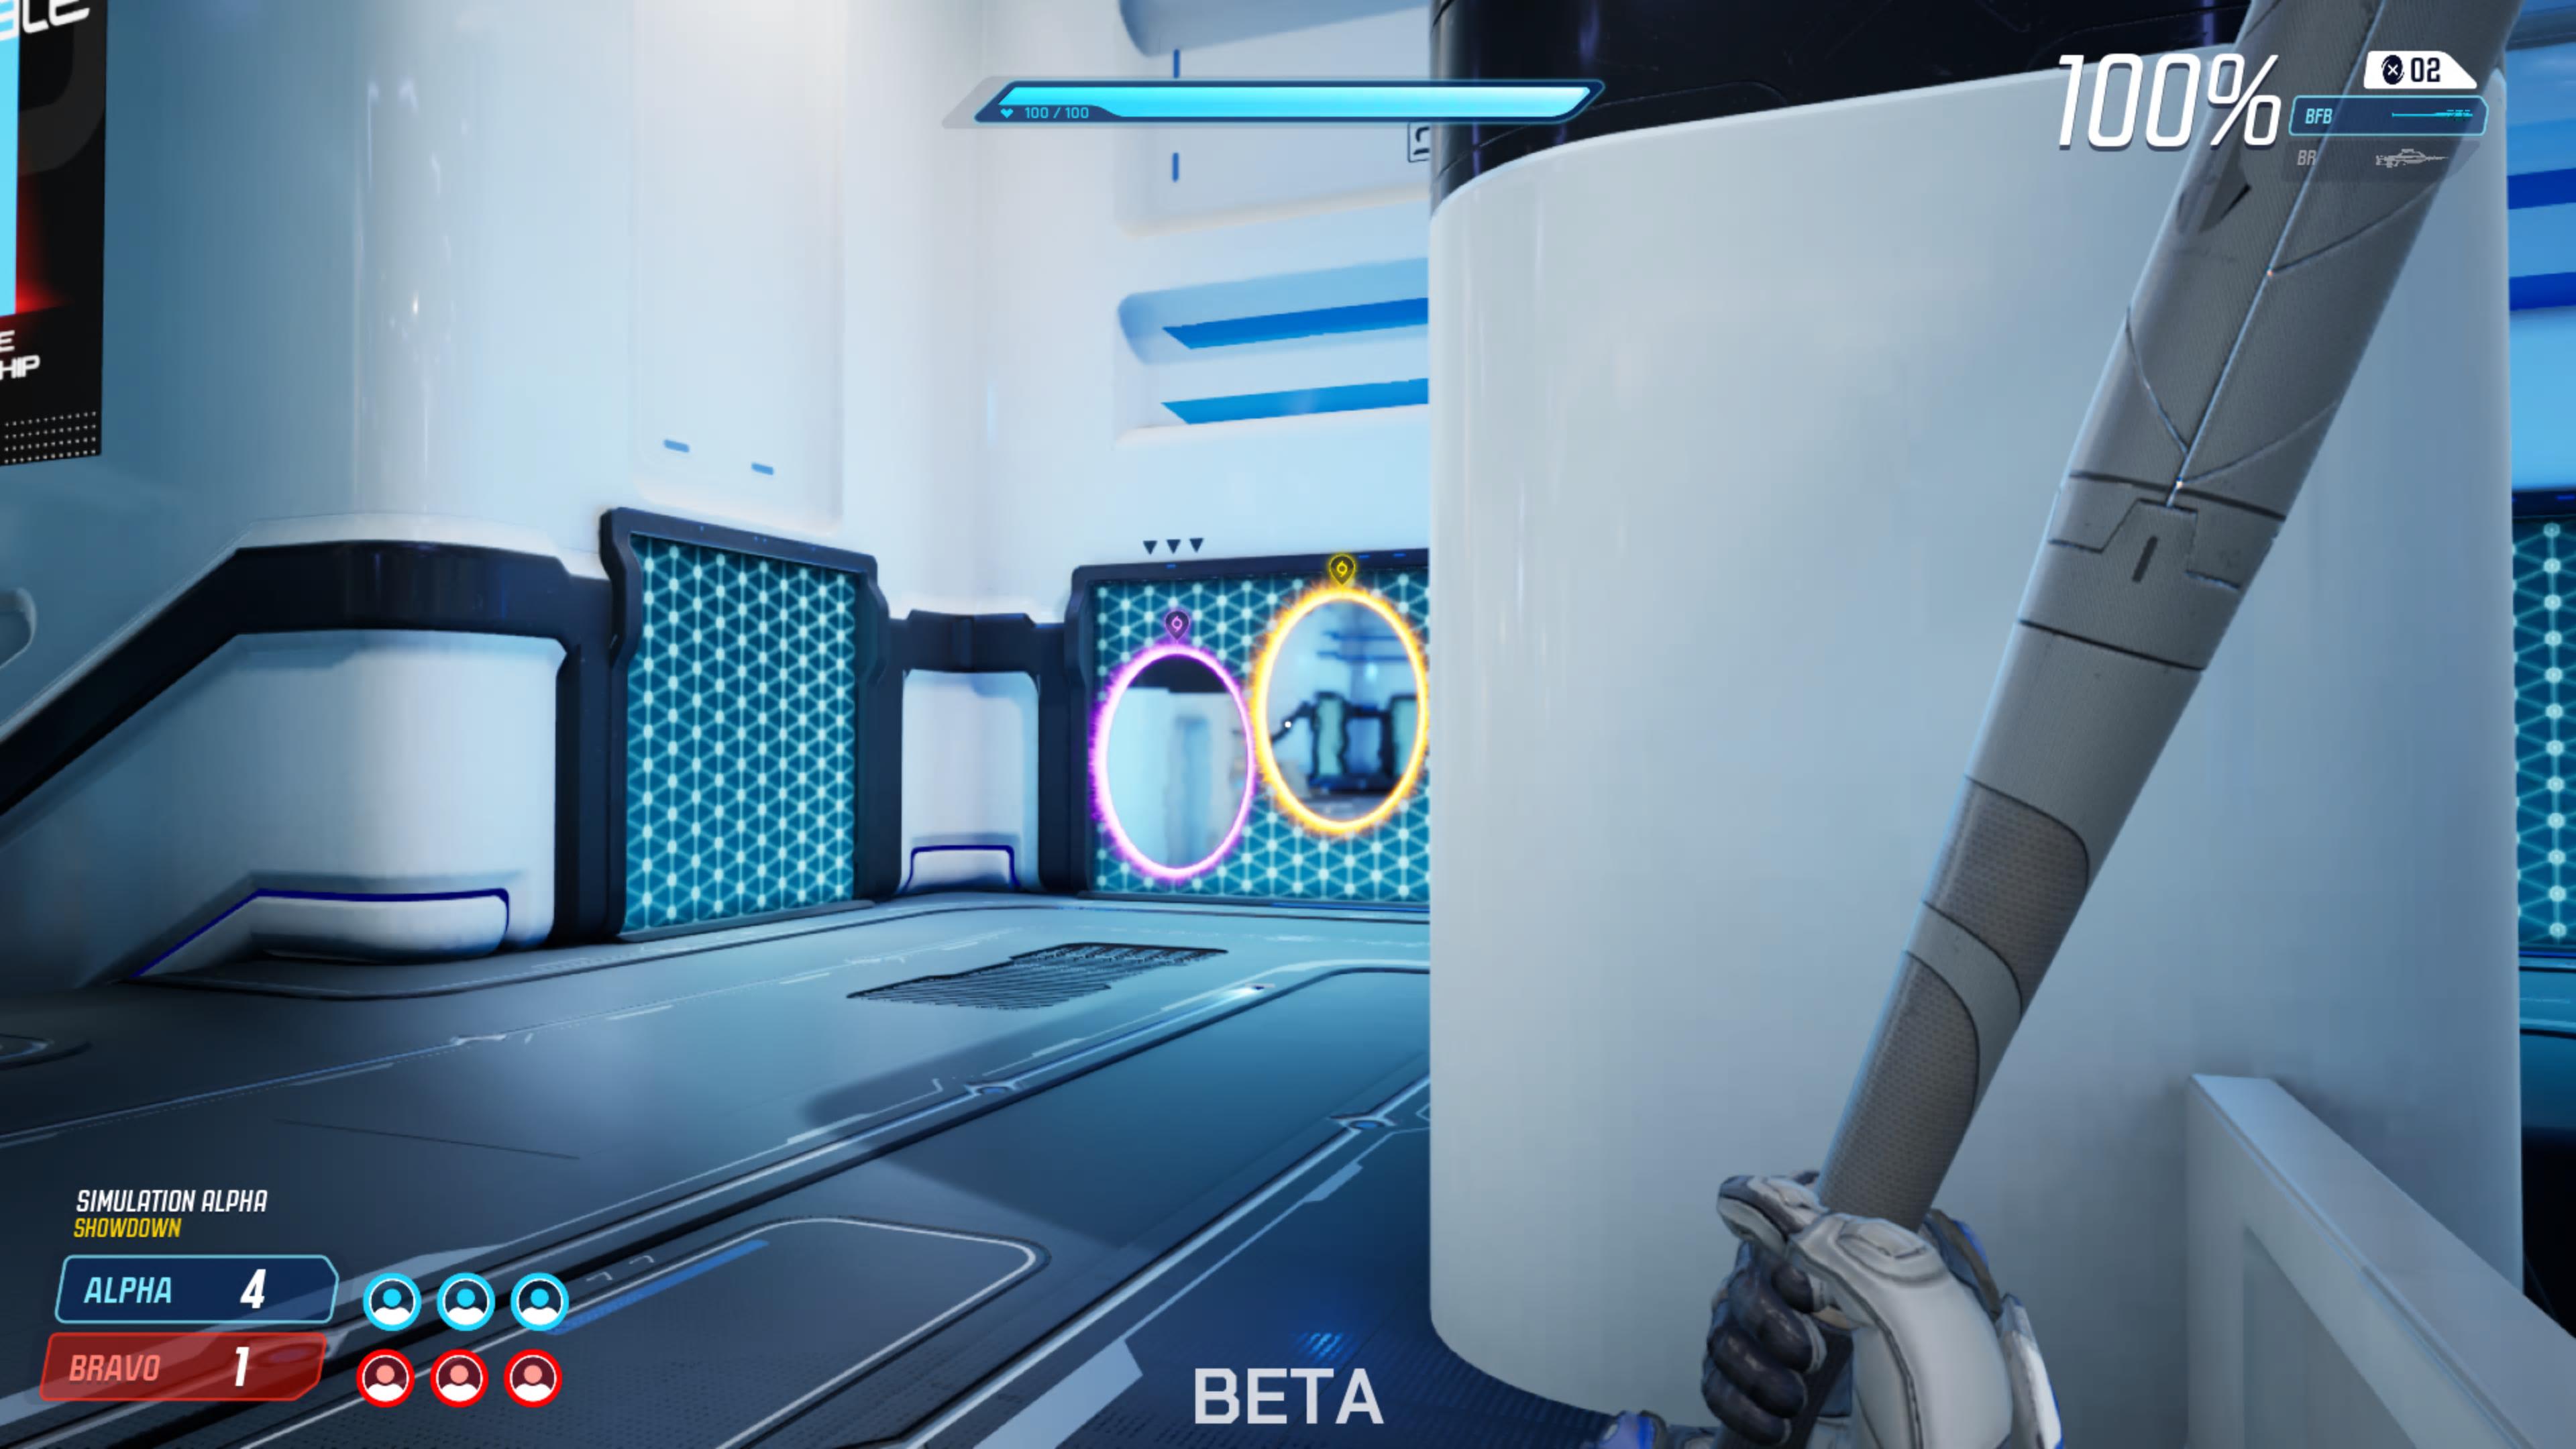 Does Splitgate Have Bots, And How To Set Up A Bot Match